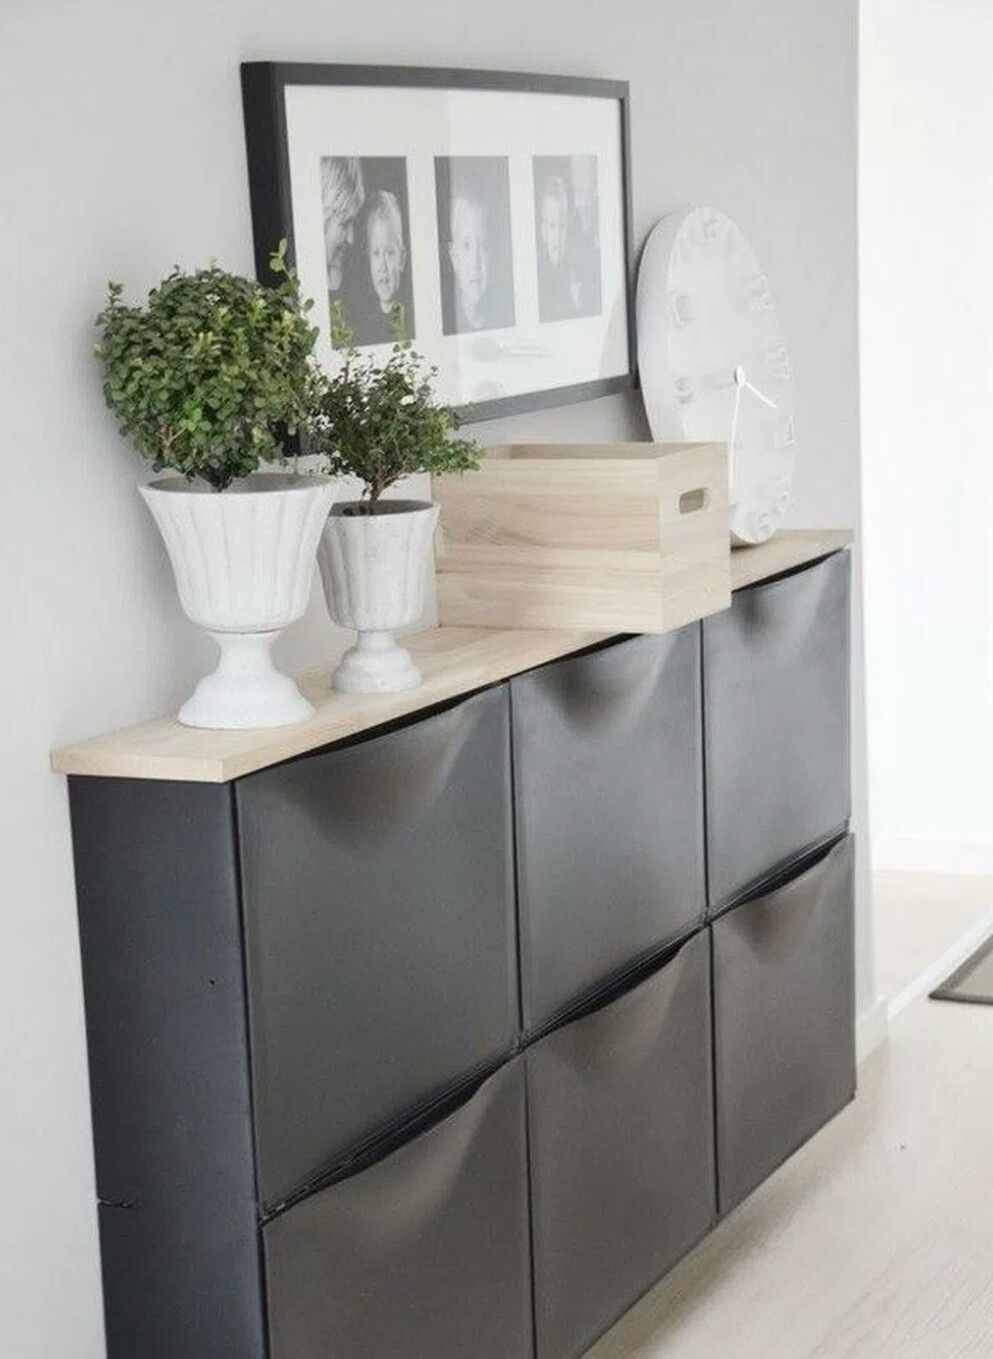 21 ikea hacks that will drastically change the way your